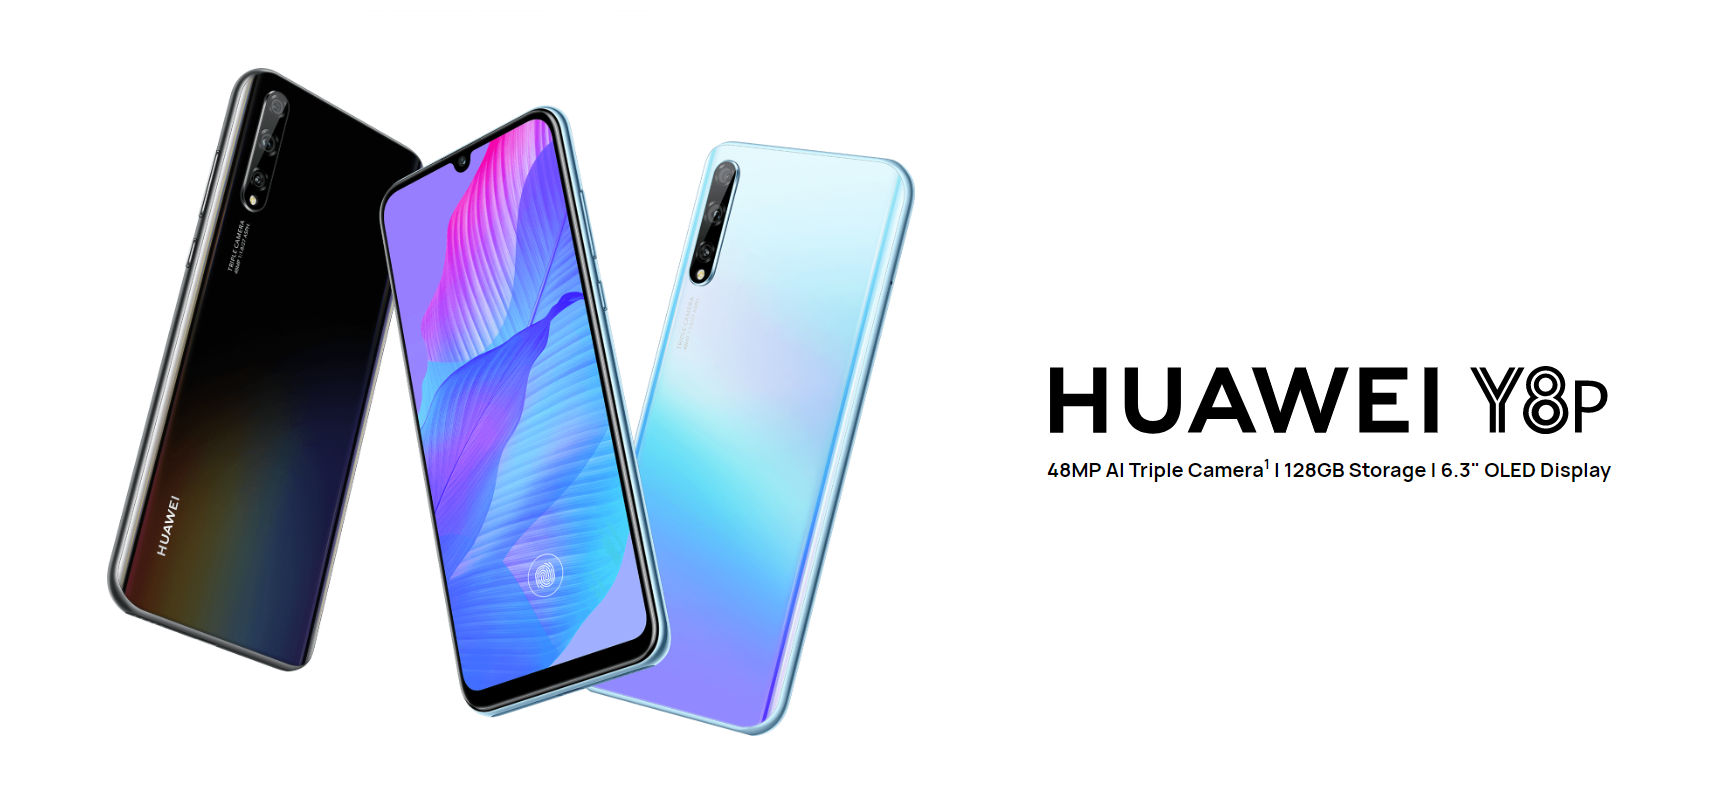 Huawei Y8p Launched with Kirin 710F and 4,000mAh Battery